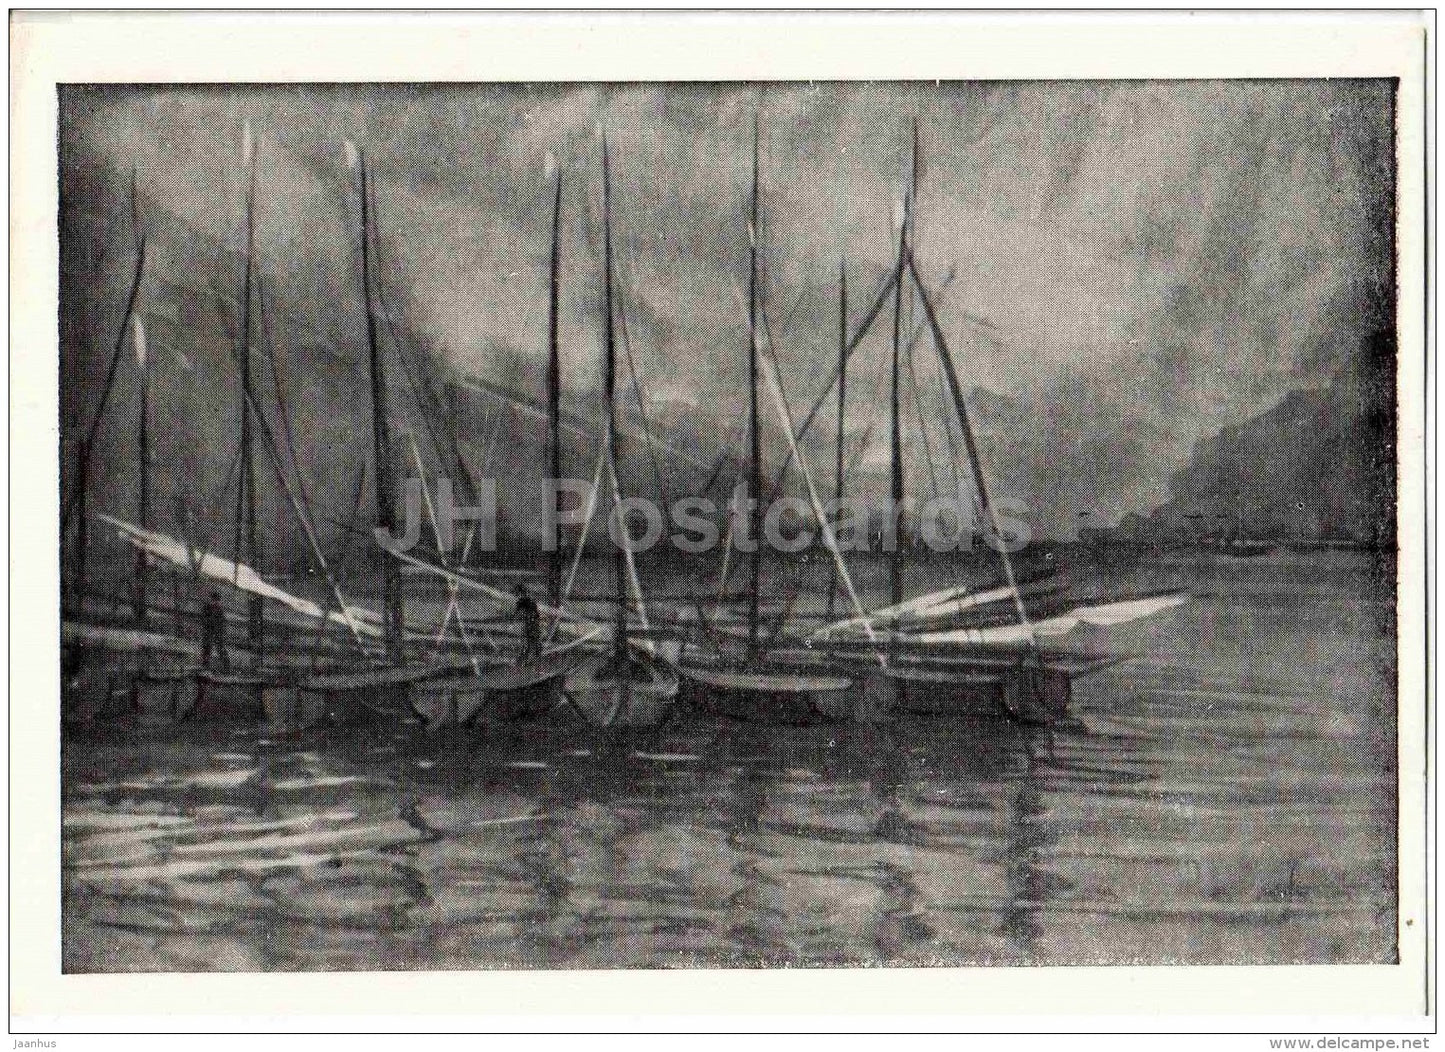 painting by Ramnath Pasricha - Sailing Boats on a Lake - Indian art - India - 1957 - Russia USSR - unused - JH Postcards